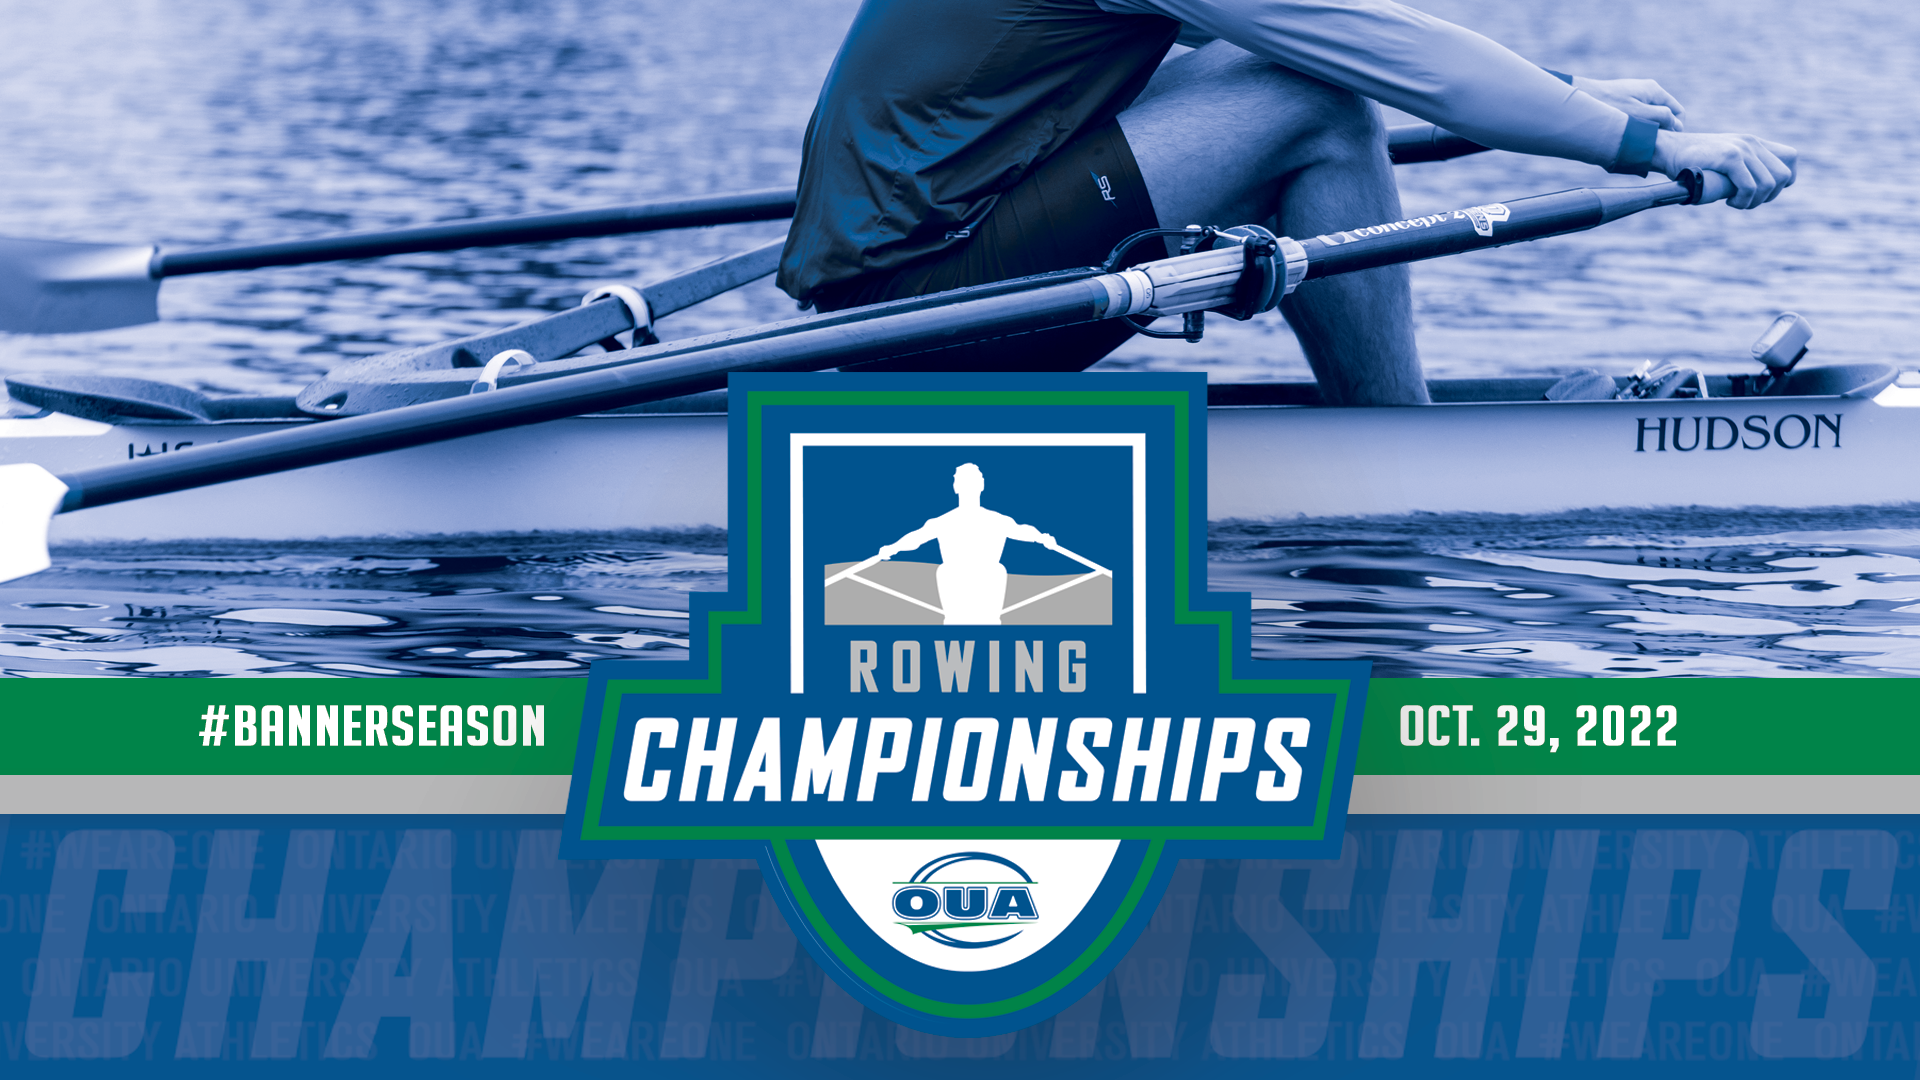 Banner Season: OUA rowers set to race their way to victory at championship regatta